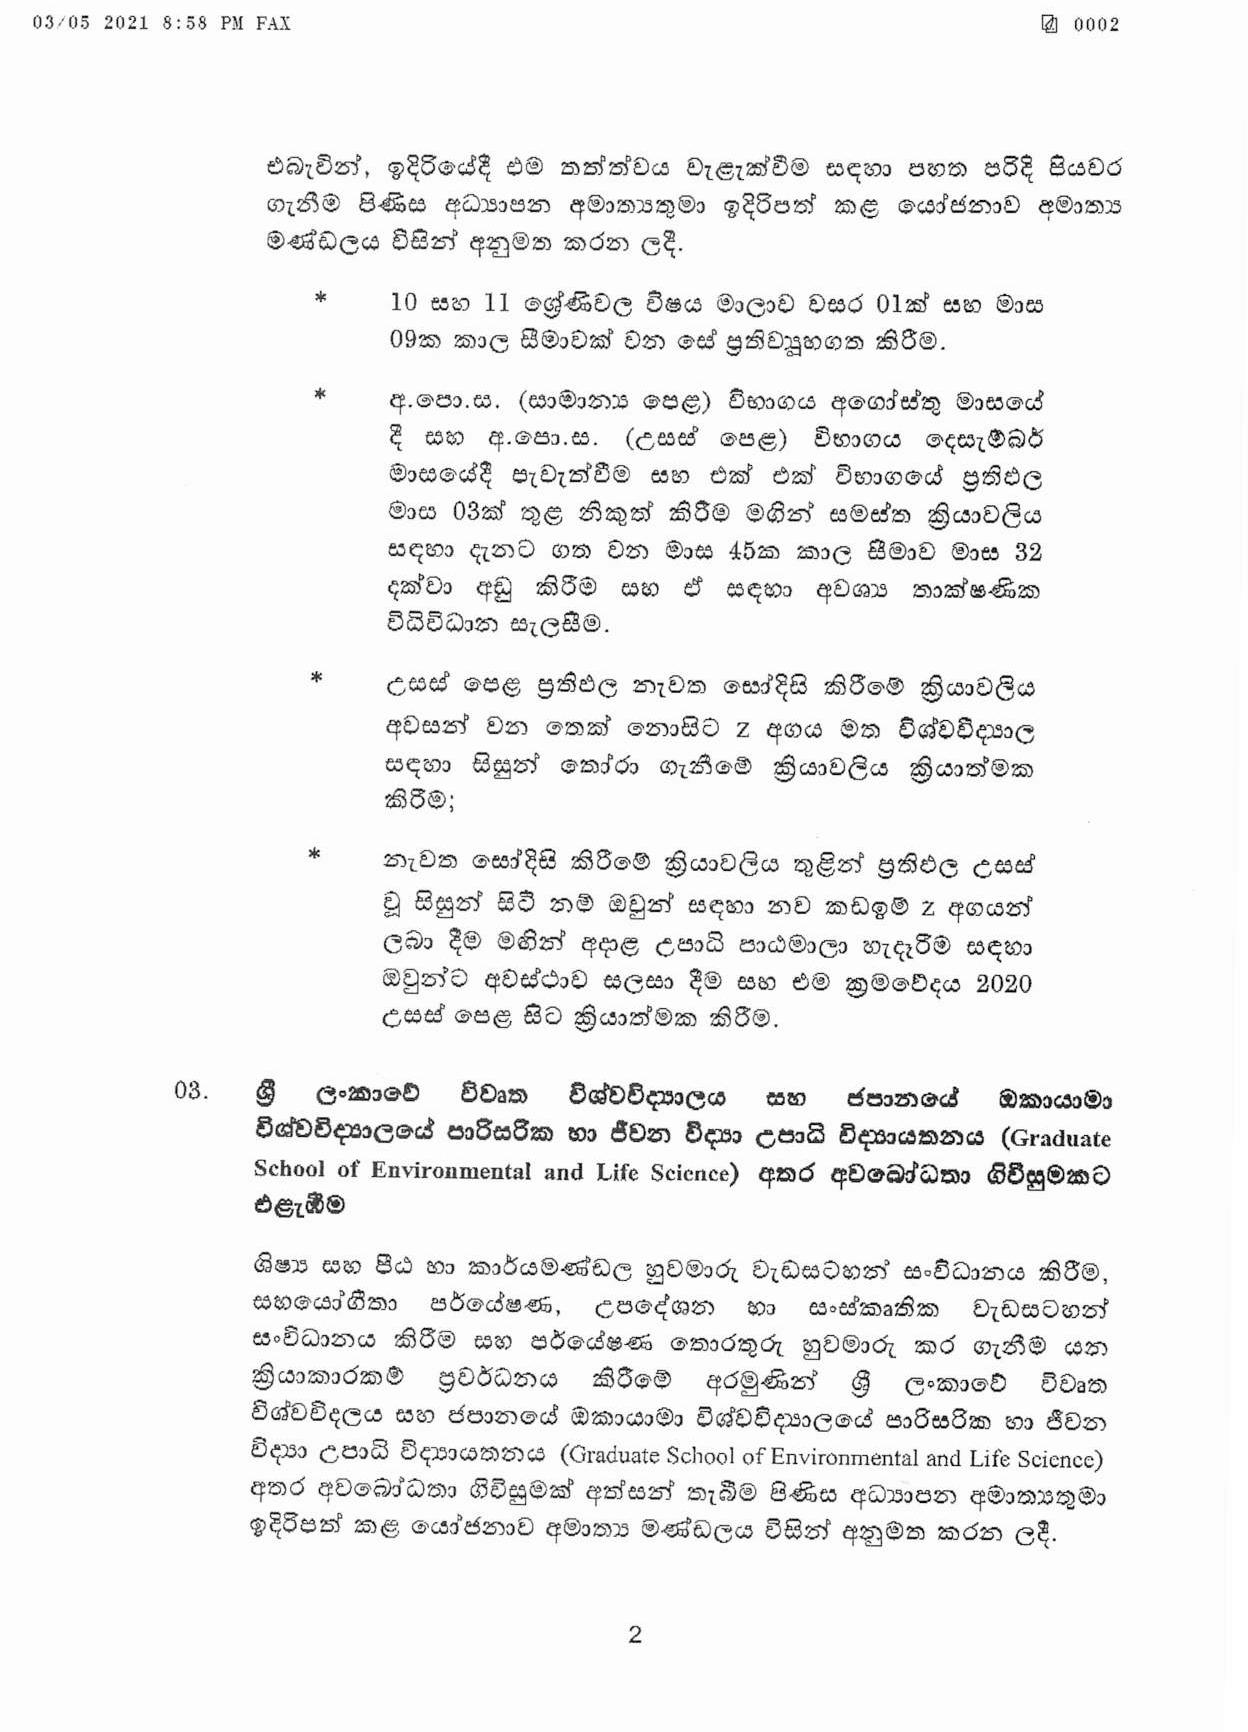 Cabinet Decision on 03.05.2021Sinhala page 002